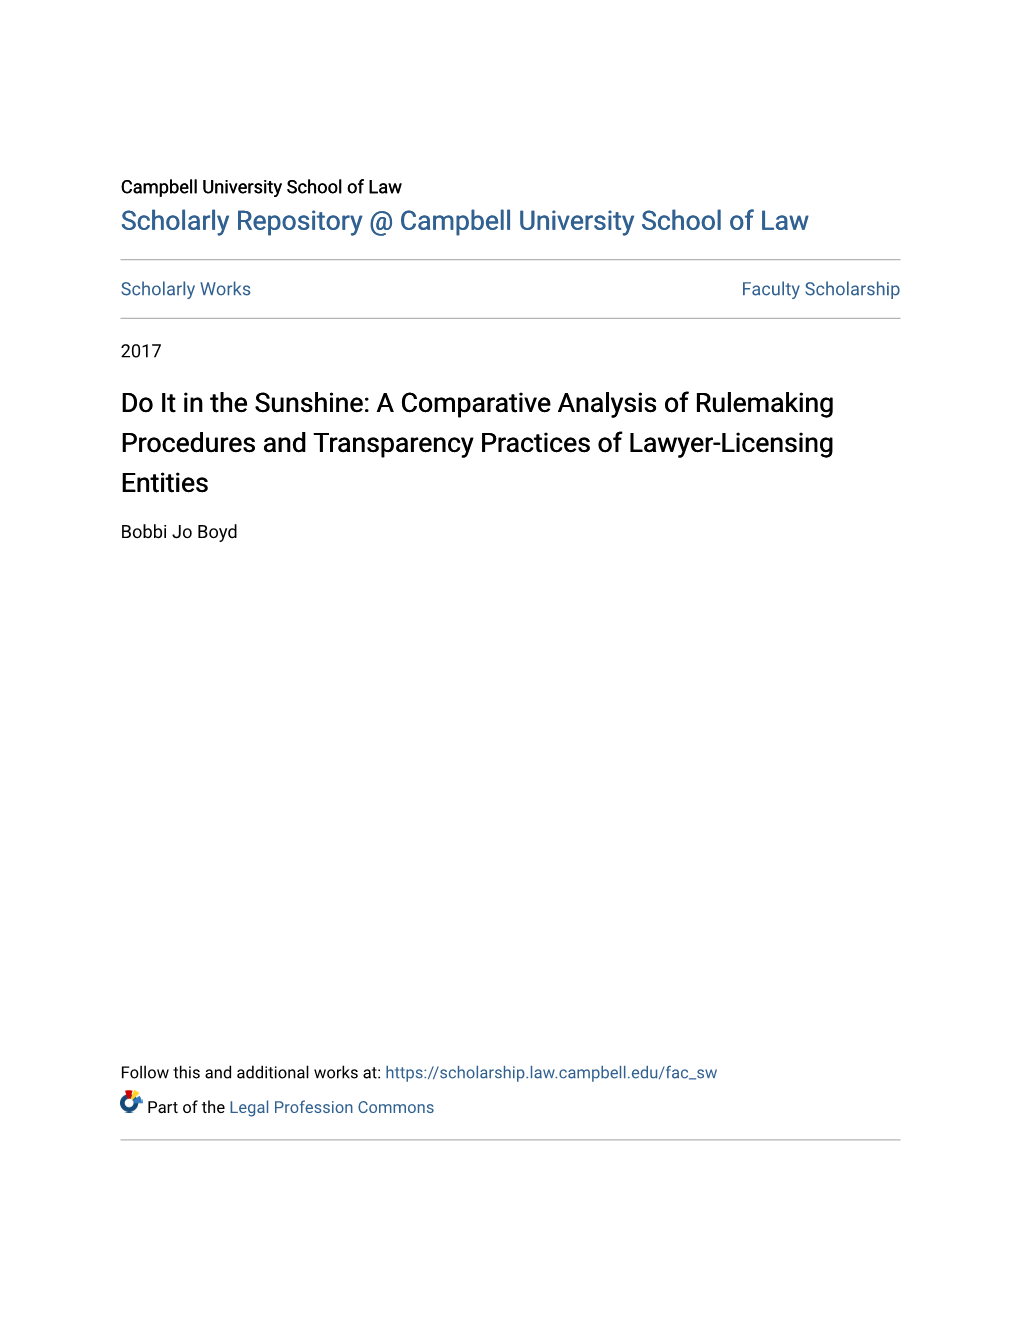 A Comparative Analysis of Rulemaking Procedures and Transparency Practices of Lawyer-Licensing Entities